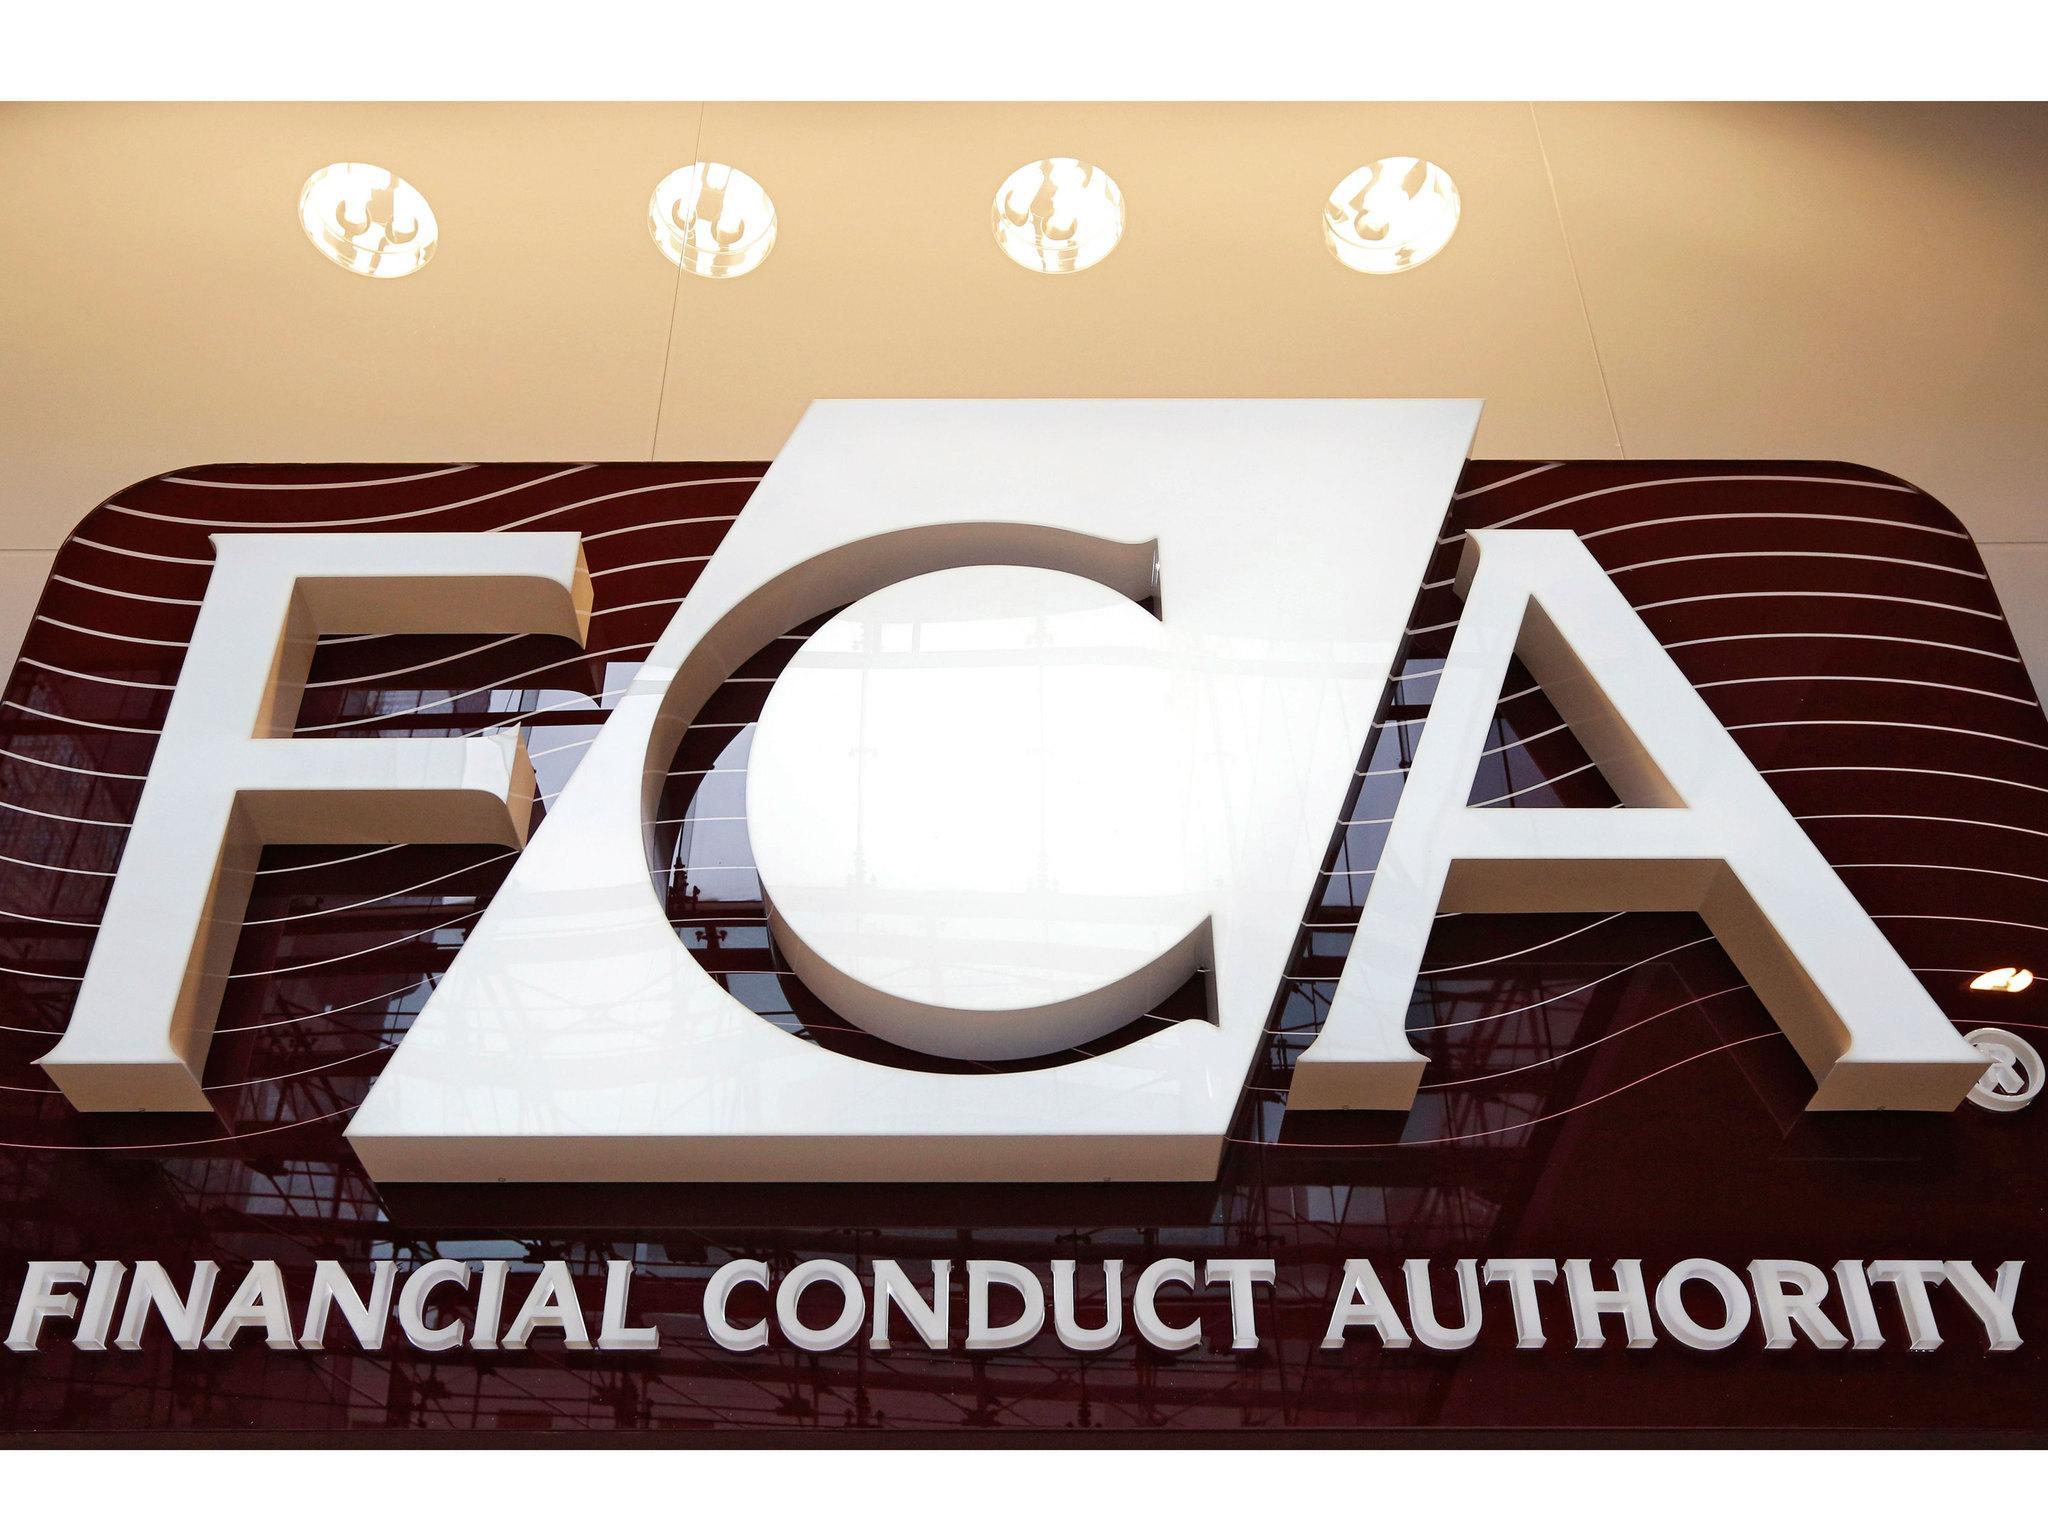 The Financial Conduct Authority wants to curb the power of fund managers